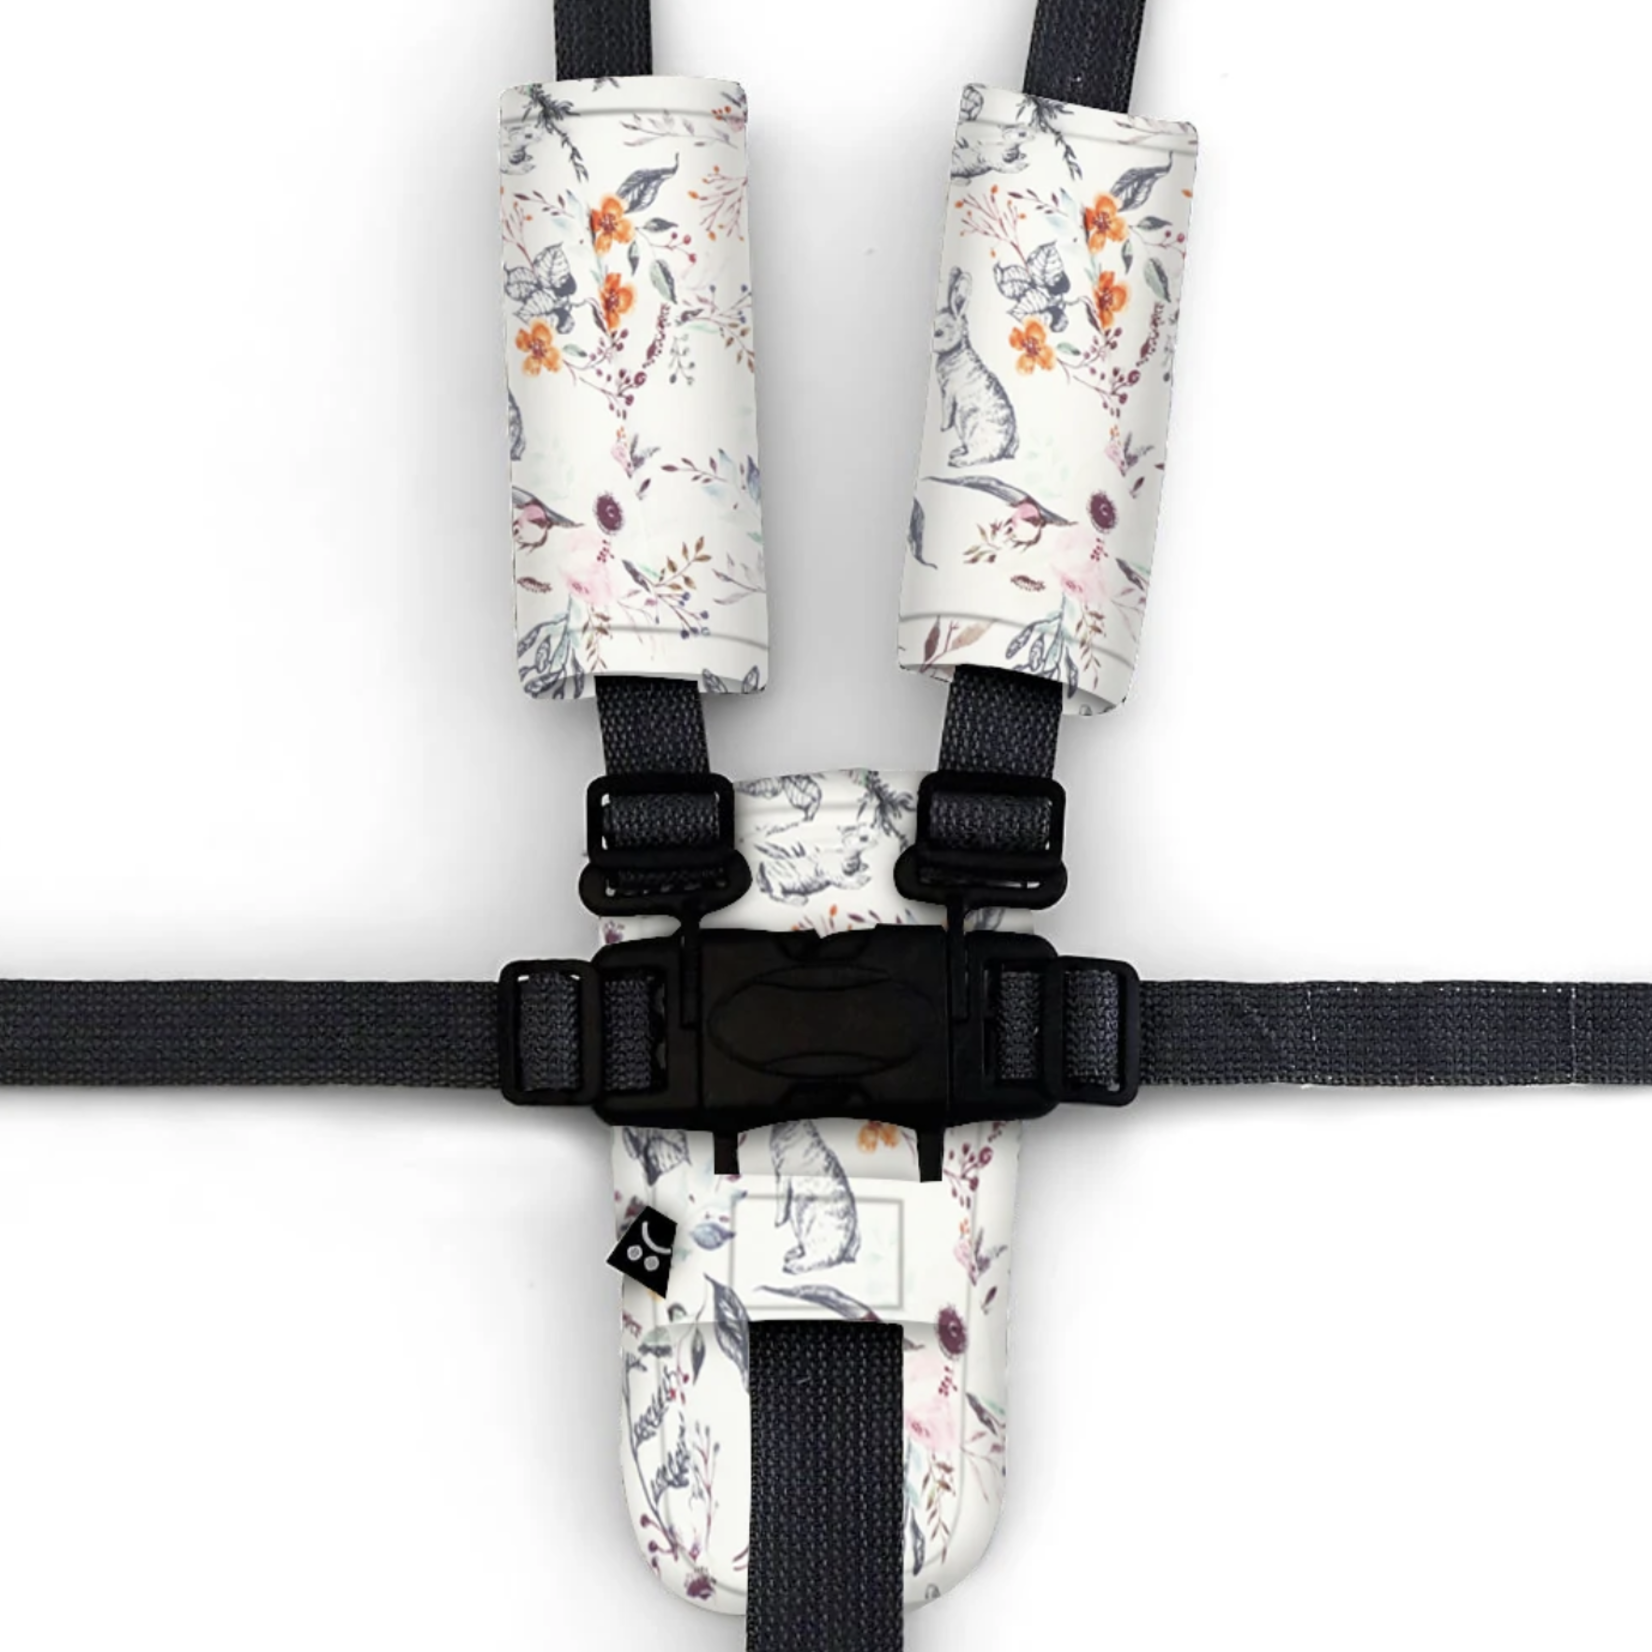 Outlookbaby 3 Piece Harness Cover Set - Enchanted Bunnies